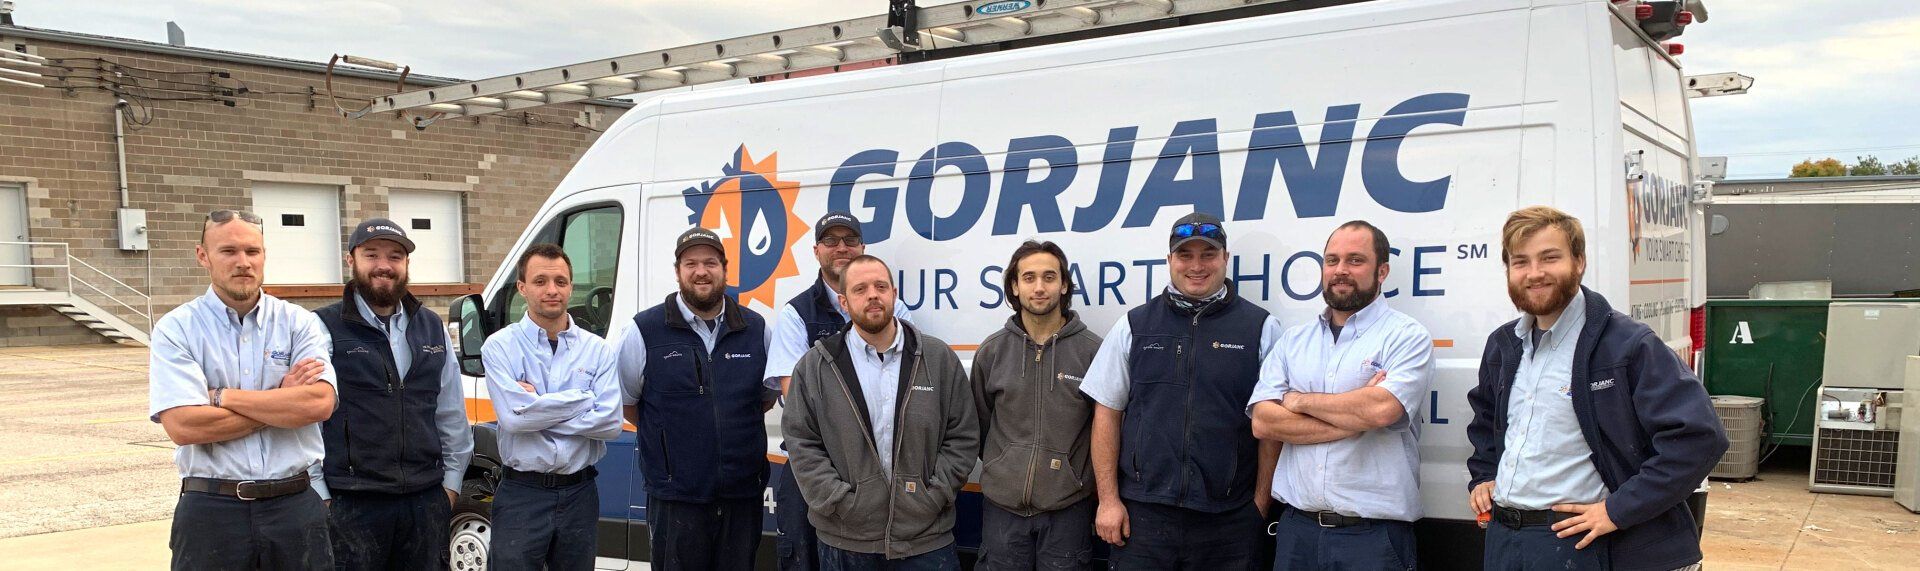 A group of men standing in front of a gorjanc truck